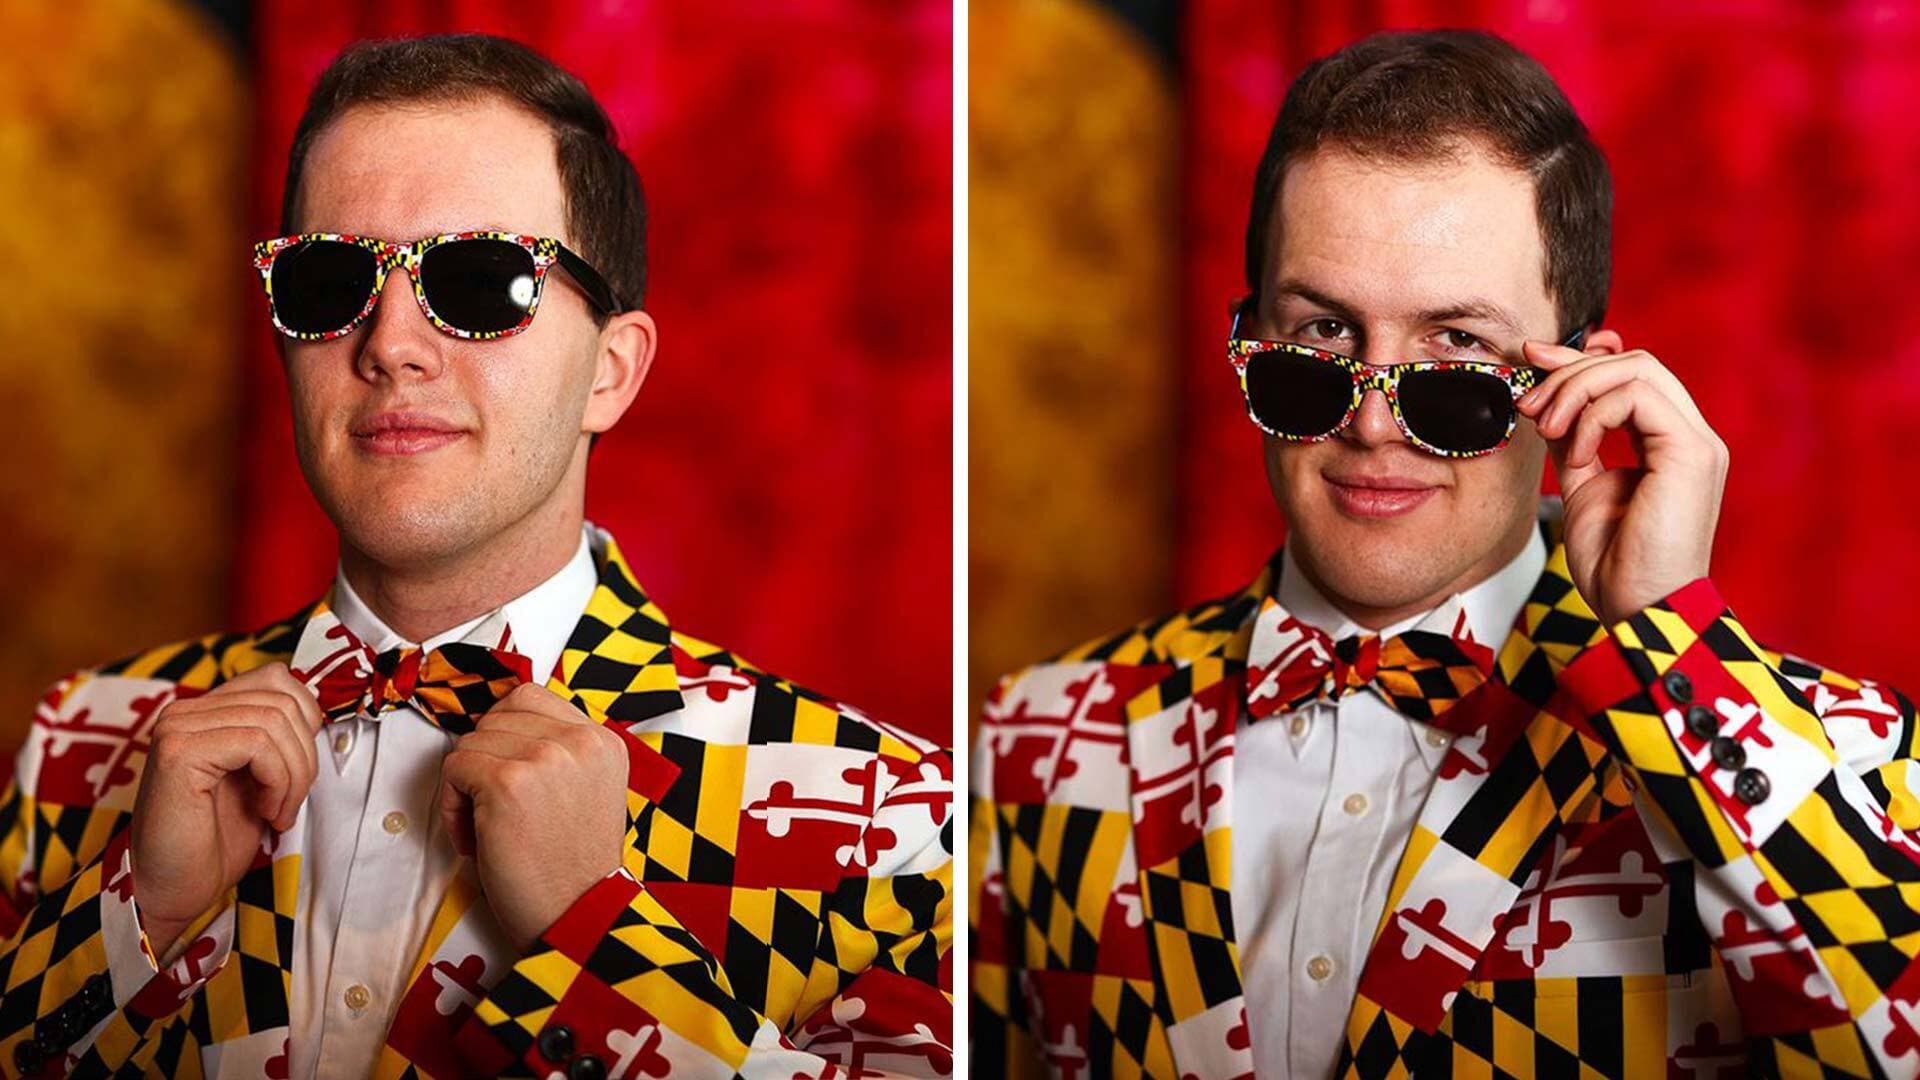 Portraits of Thomas Canary wearing Maryland flag suit and sunglasses